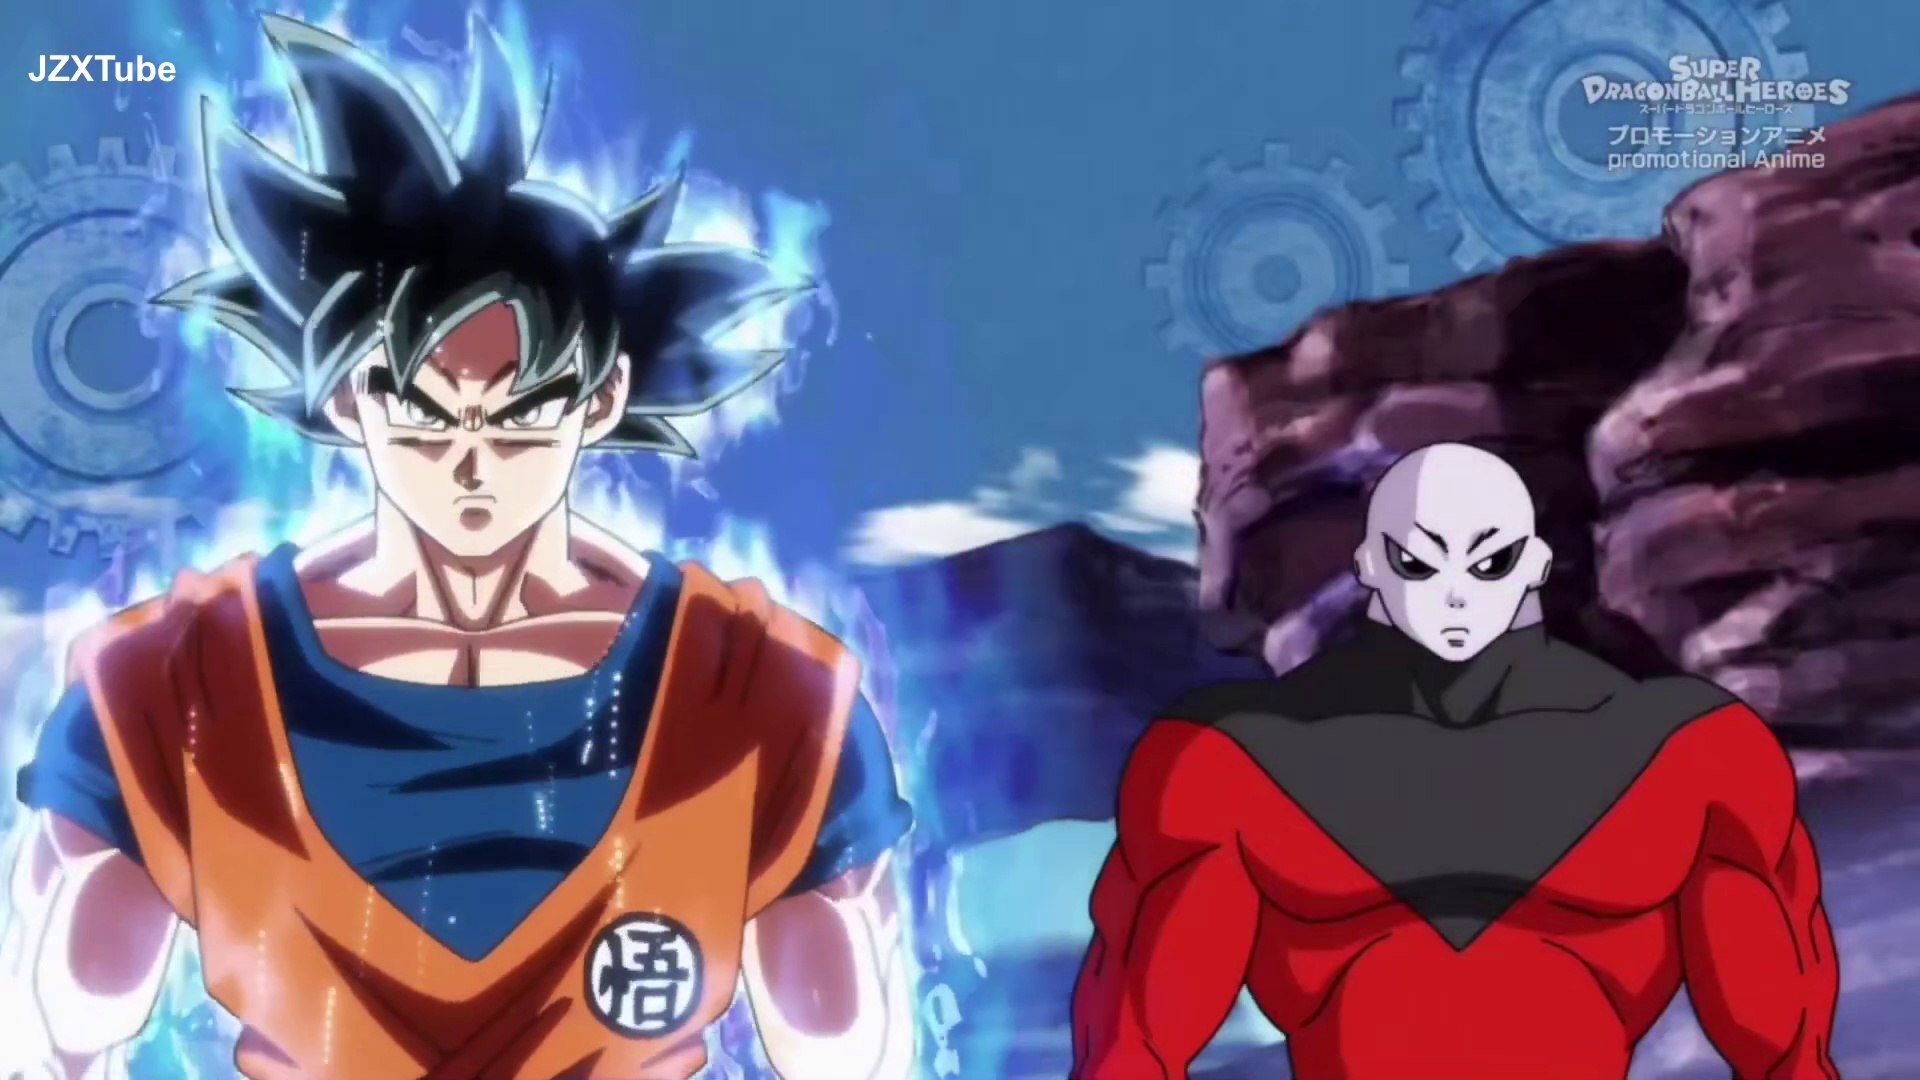 Super Dragon Ball Heroes Episode 51 Release Date!! 